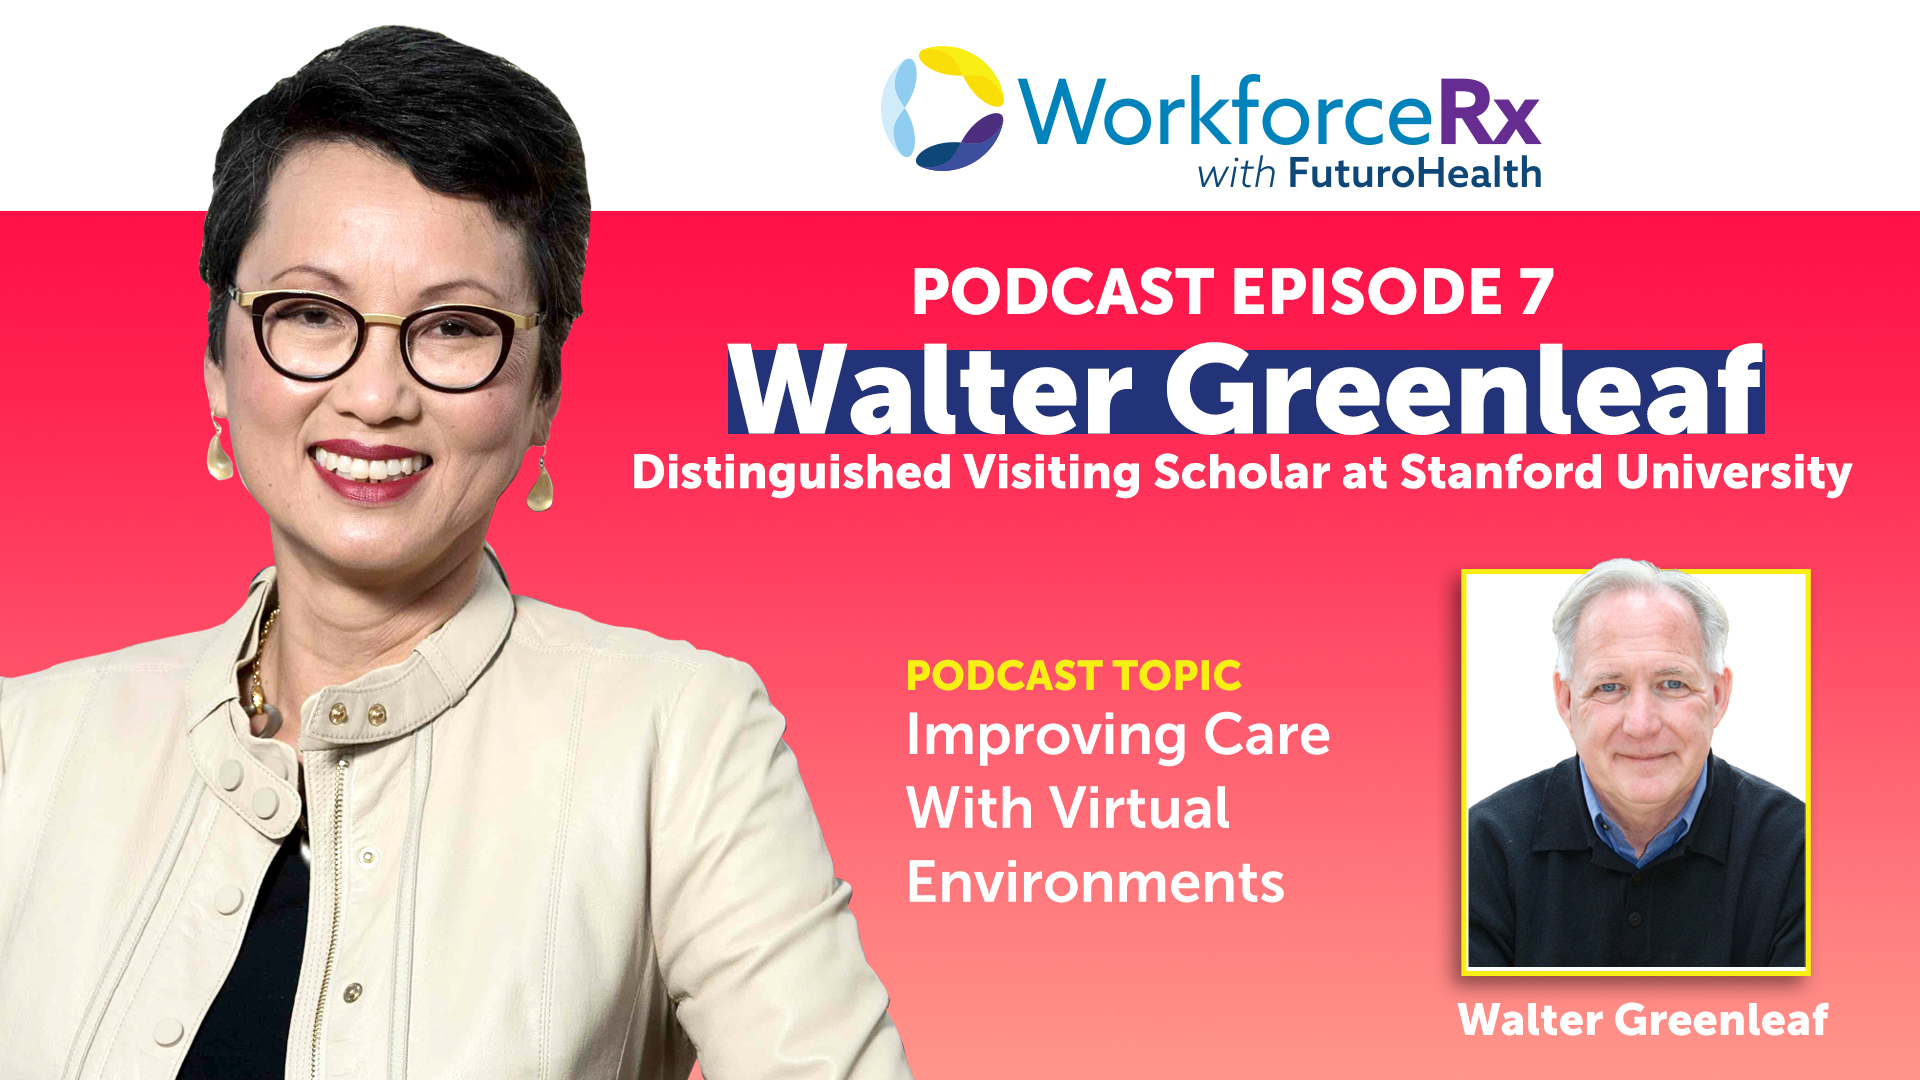 Walter Greenleaf, PhD, Distinguished Visiting Scholar at Stanford University: Improving Care with Virtual Environments